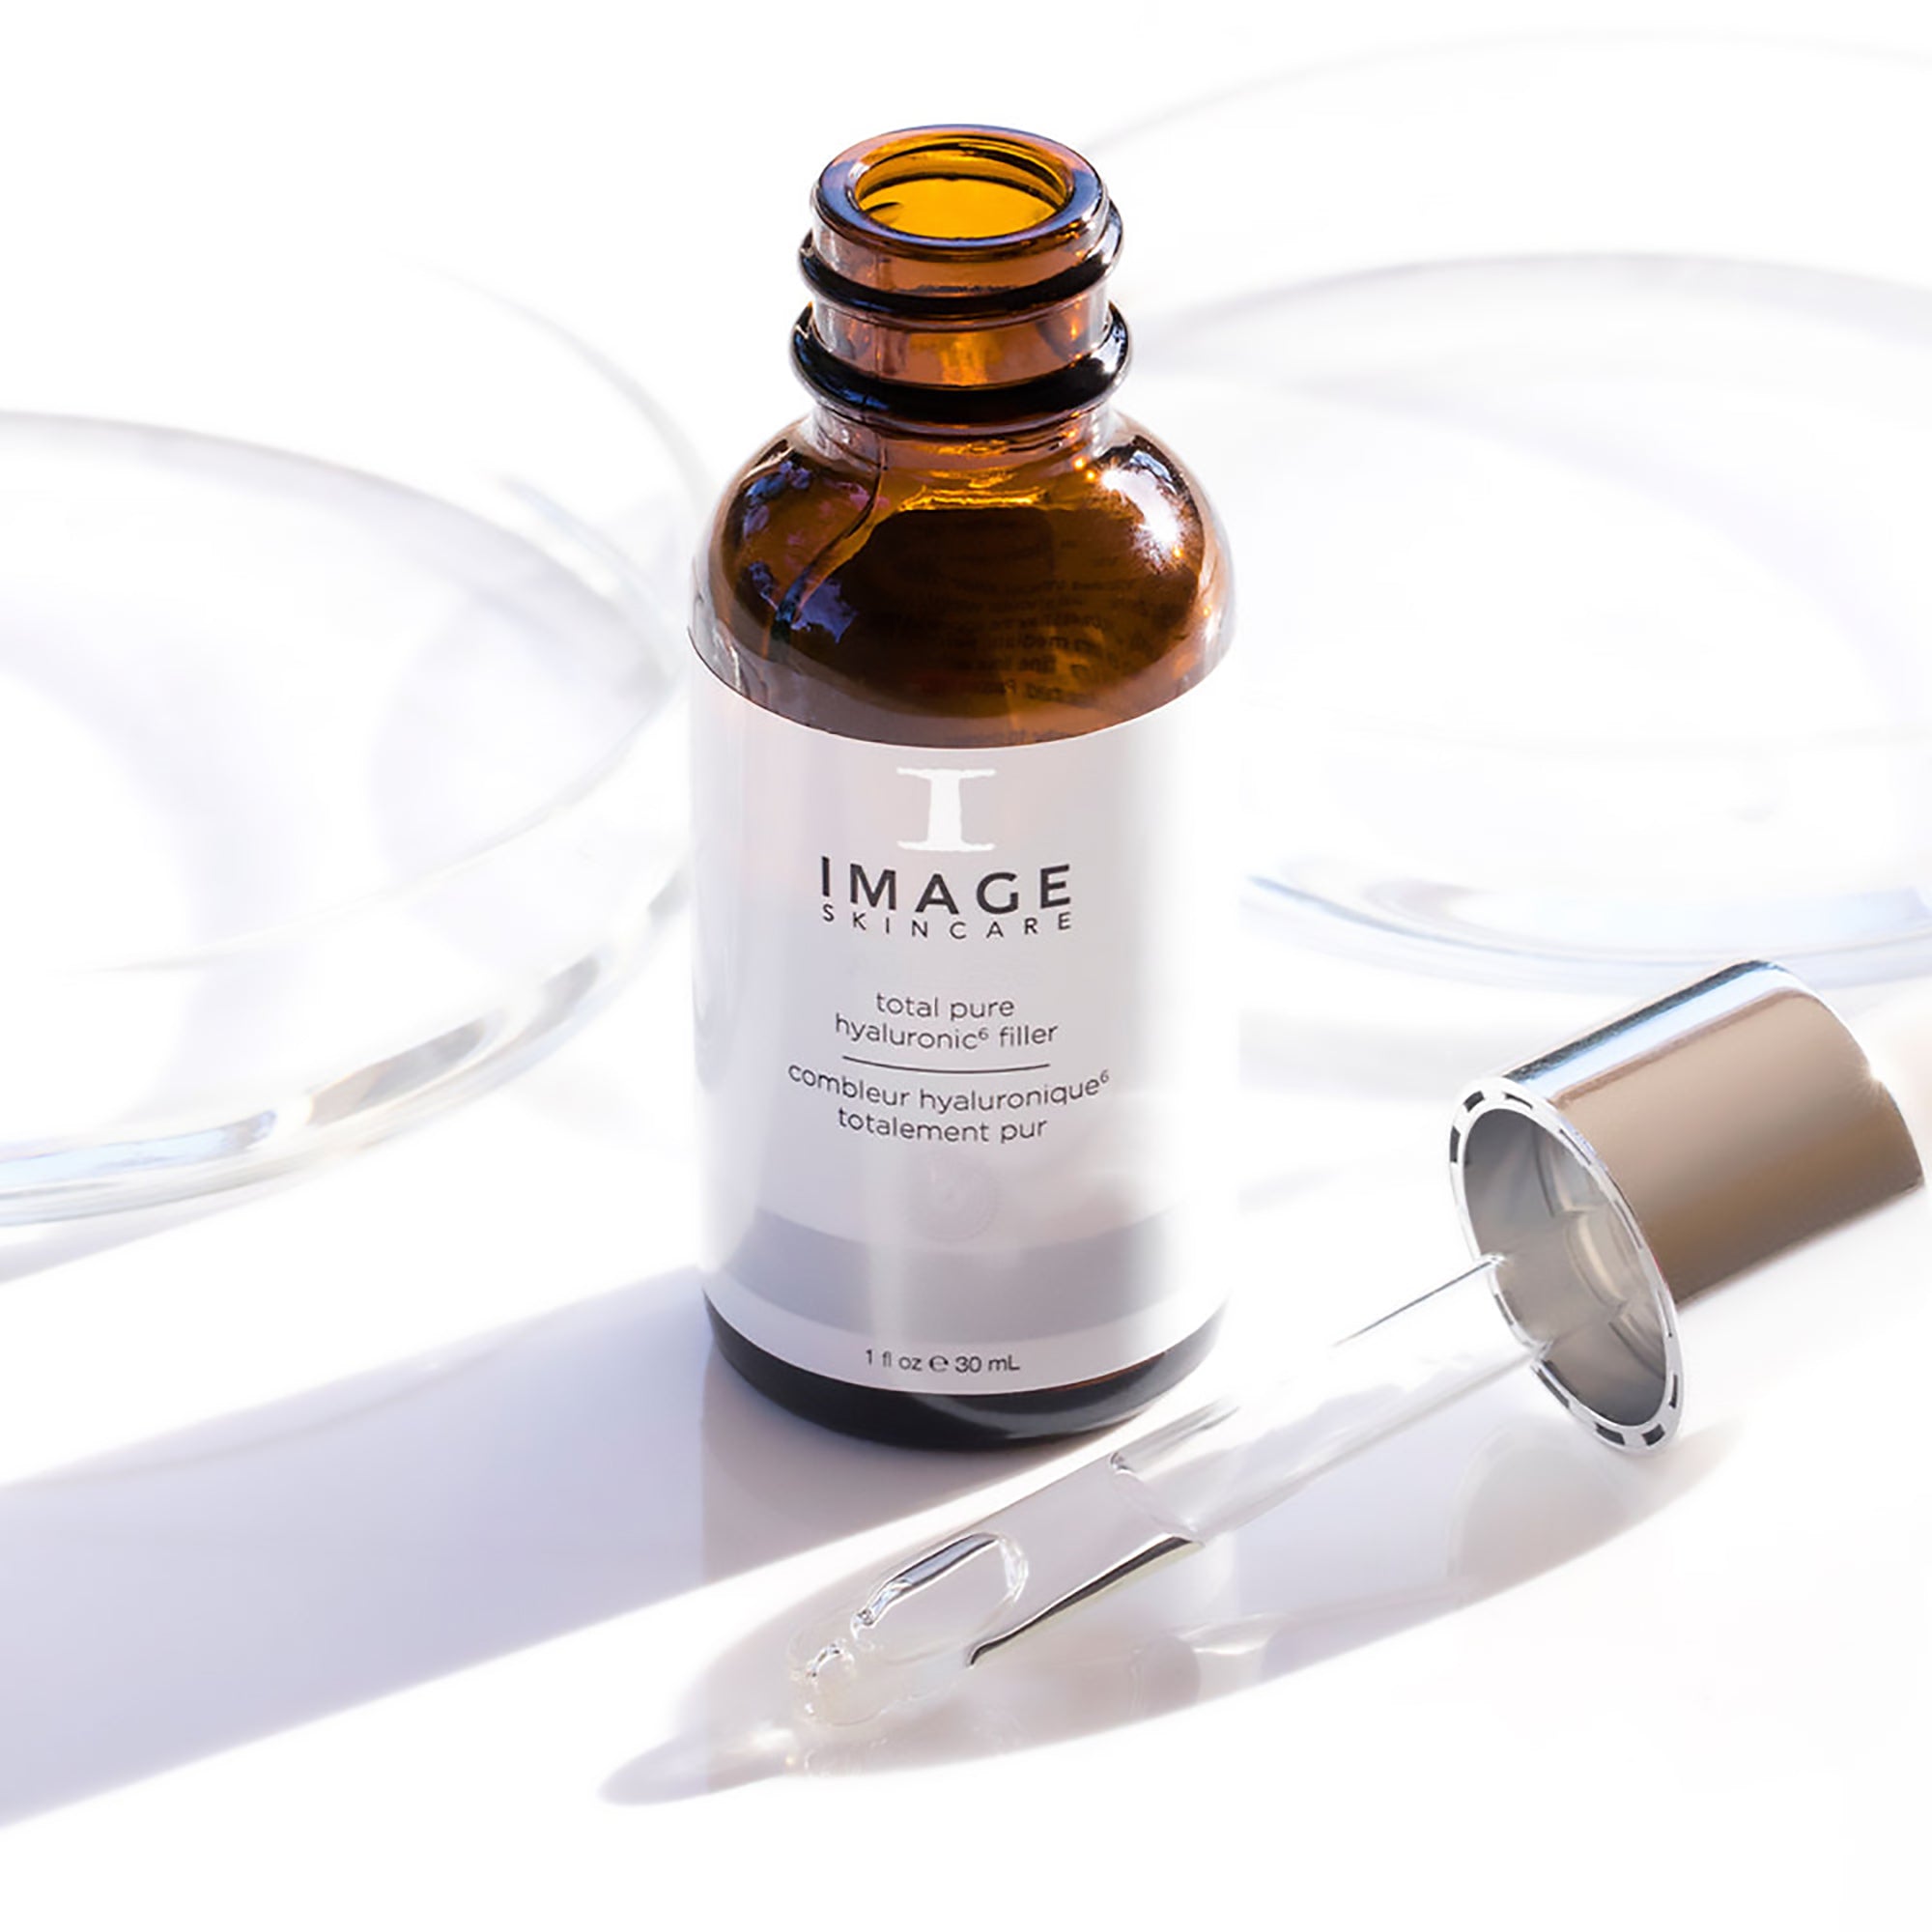 Image Skincare Ageless Total Pure Hyaluronic-6 Filler / 1OZ